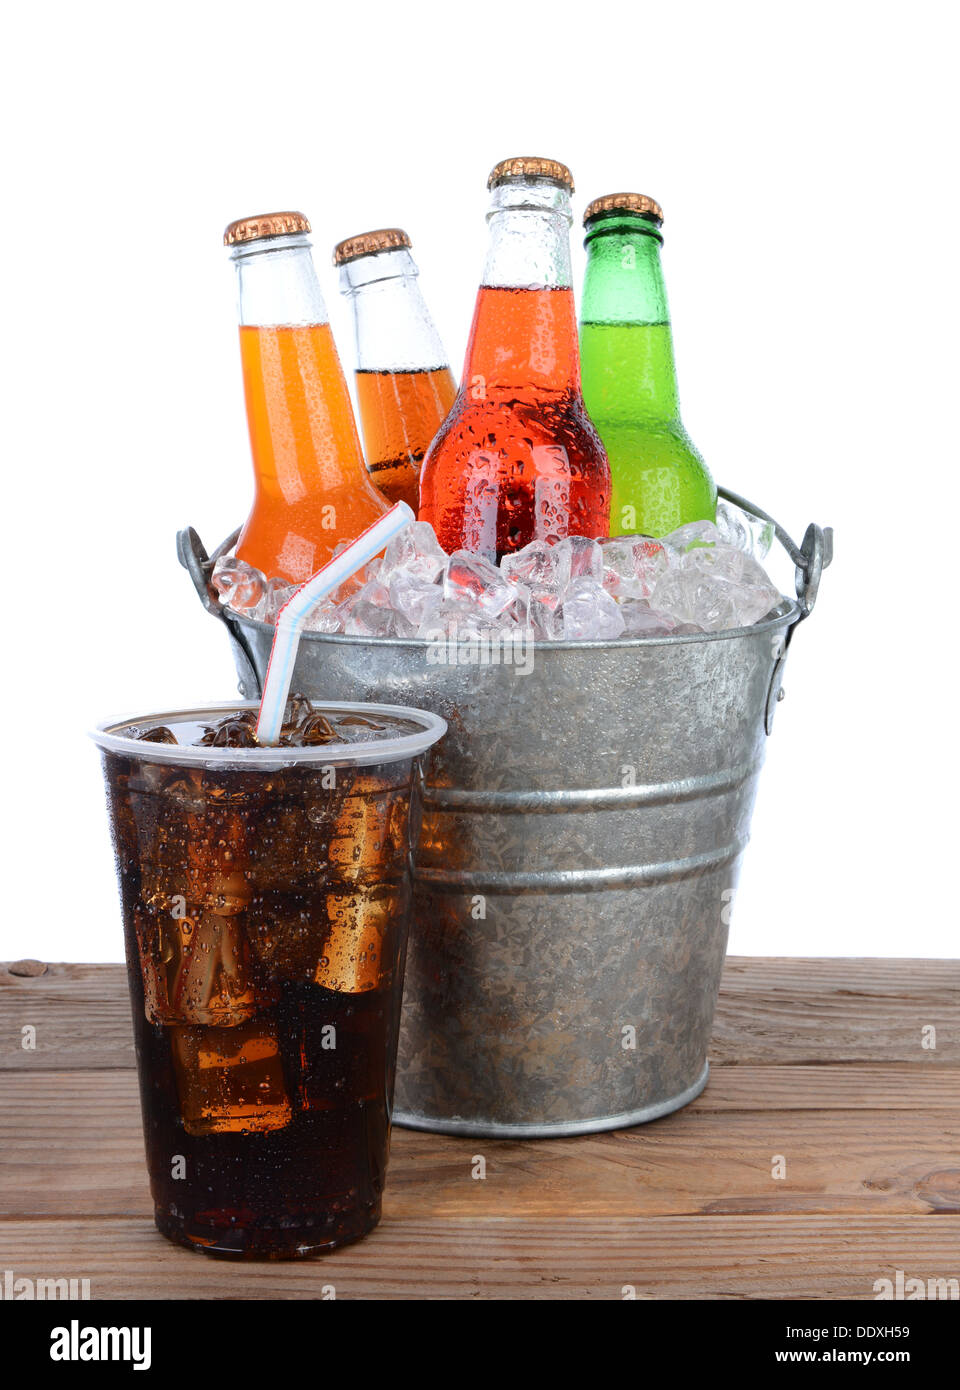 Picnic table ready for a summertime picnic. Cold soda bottles in a bucket full of ice, a full glass of cola with straw. Stock Photo